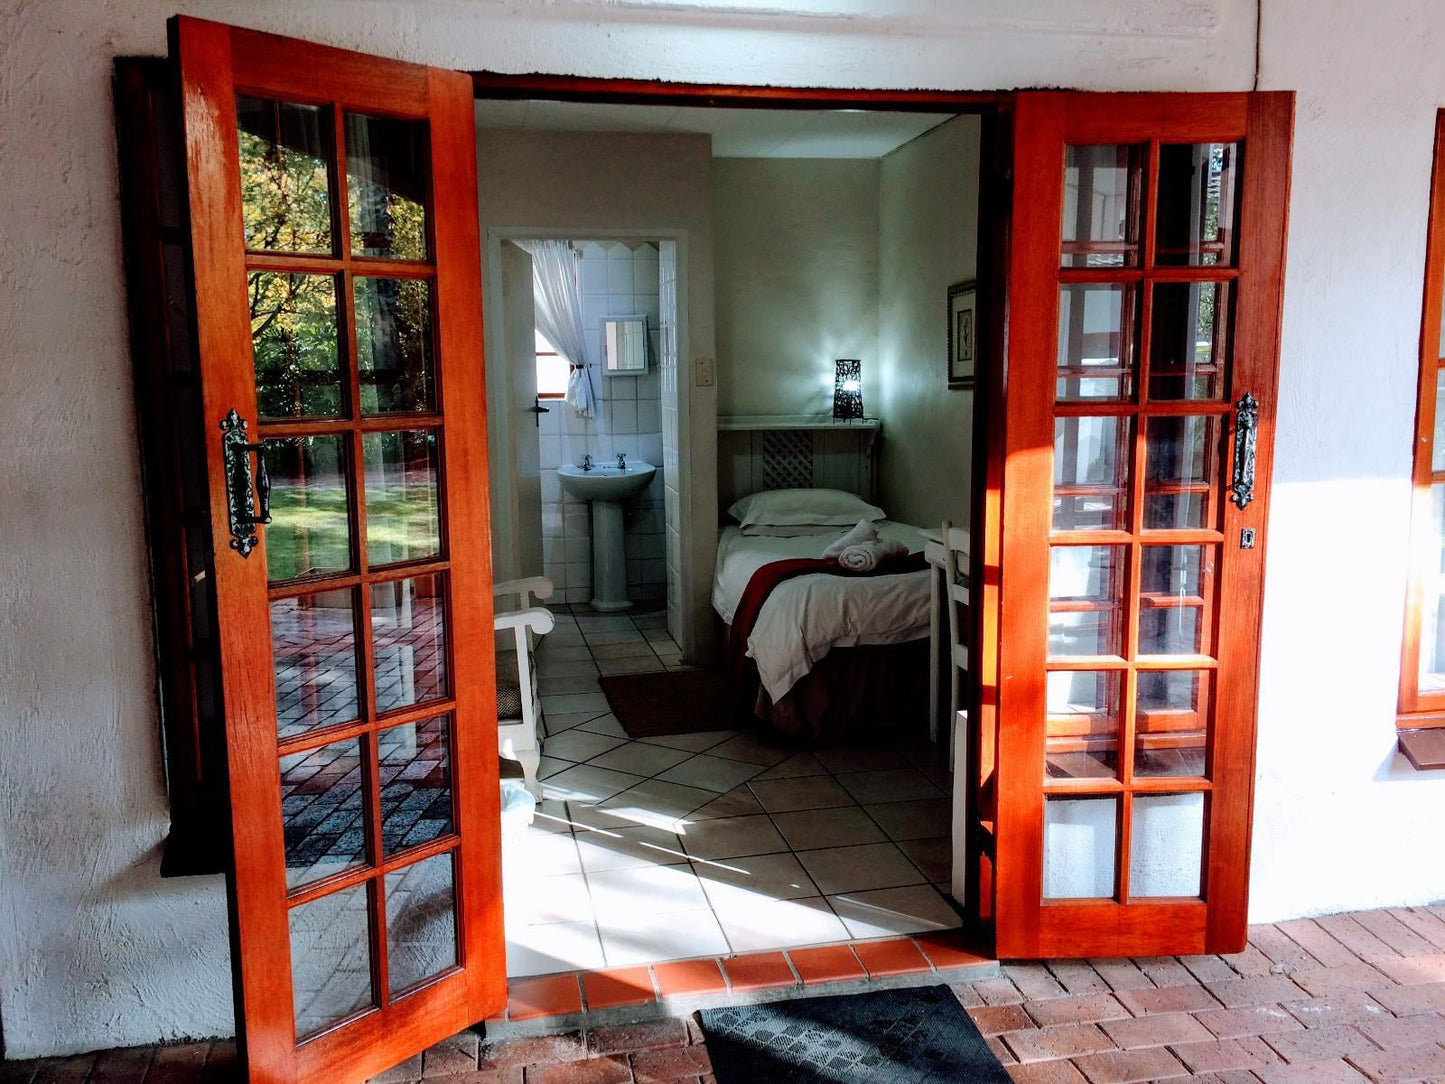 Polokwane Place Polokwane Central Polokwane Pietersburg Limpopo Province South Africa Door, Architecture, Bedroom